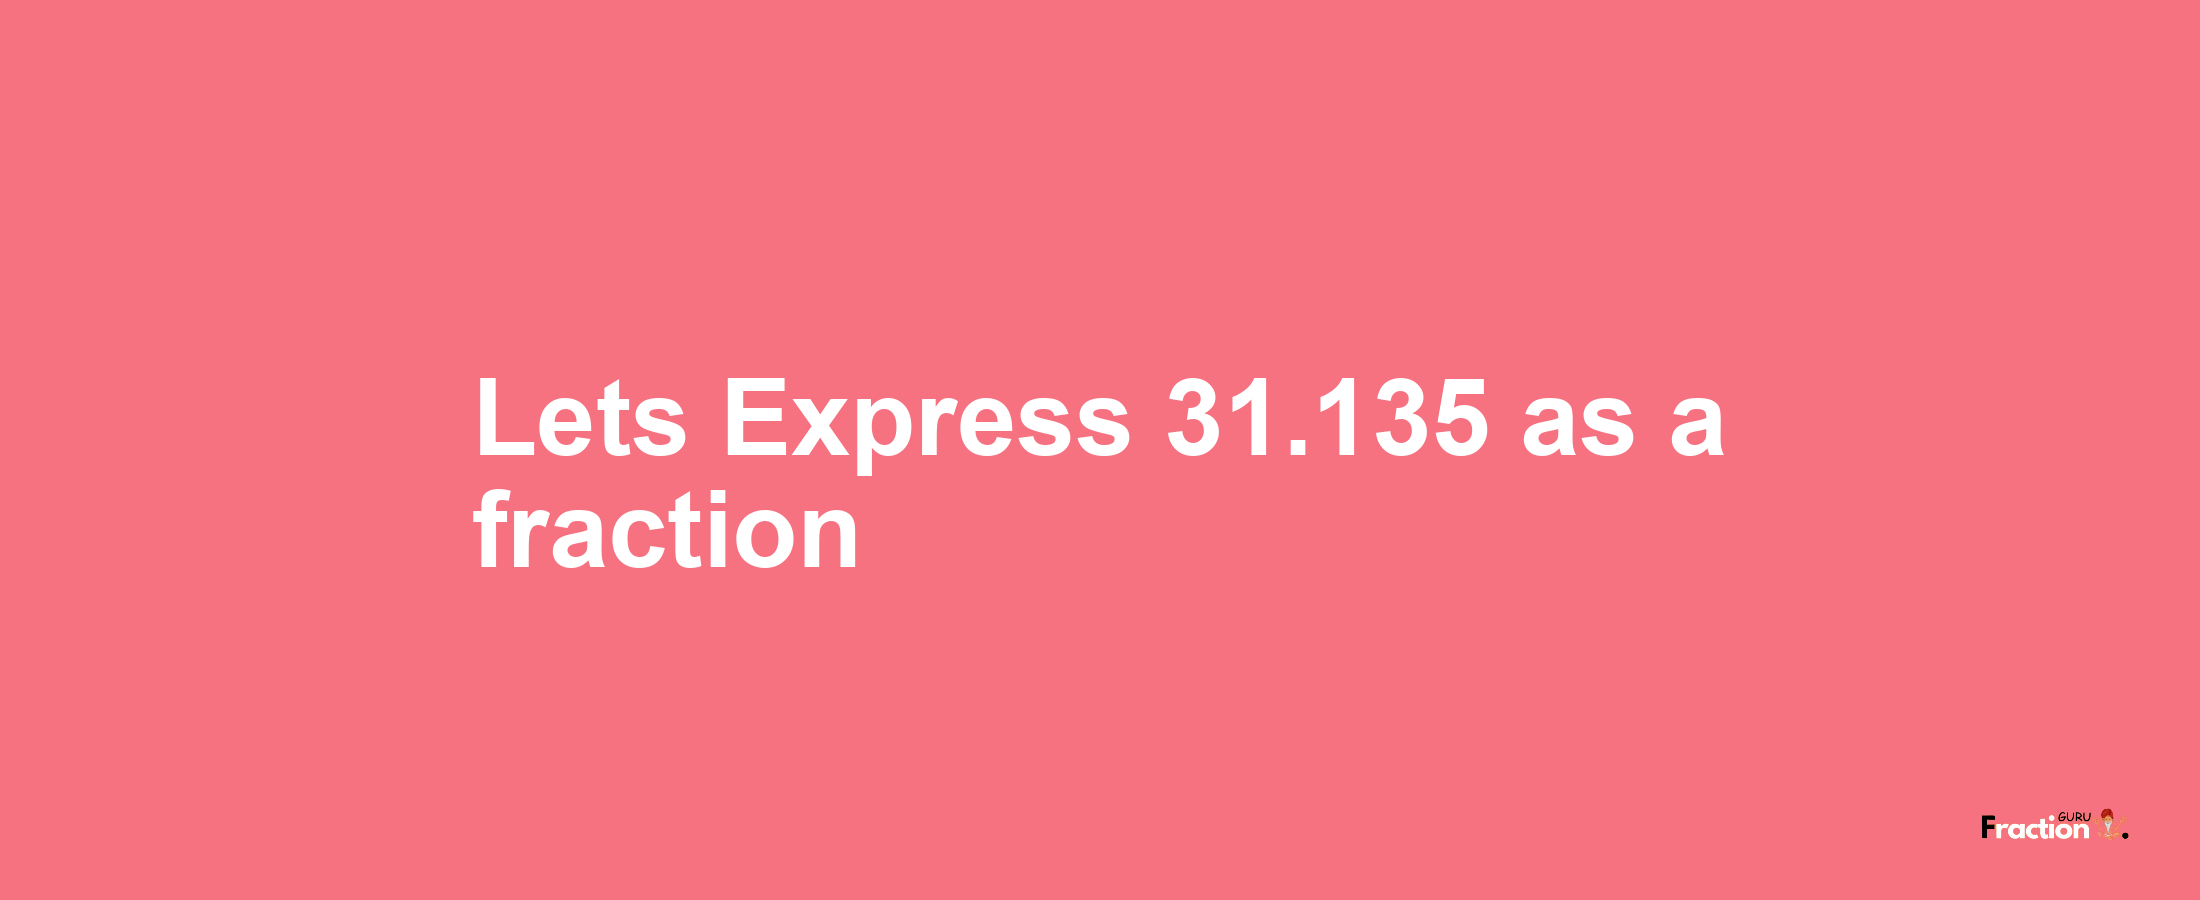 Lets Express 31.135 as afraction